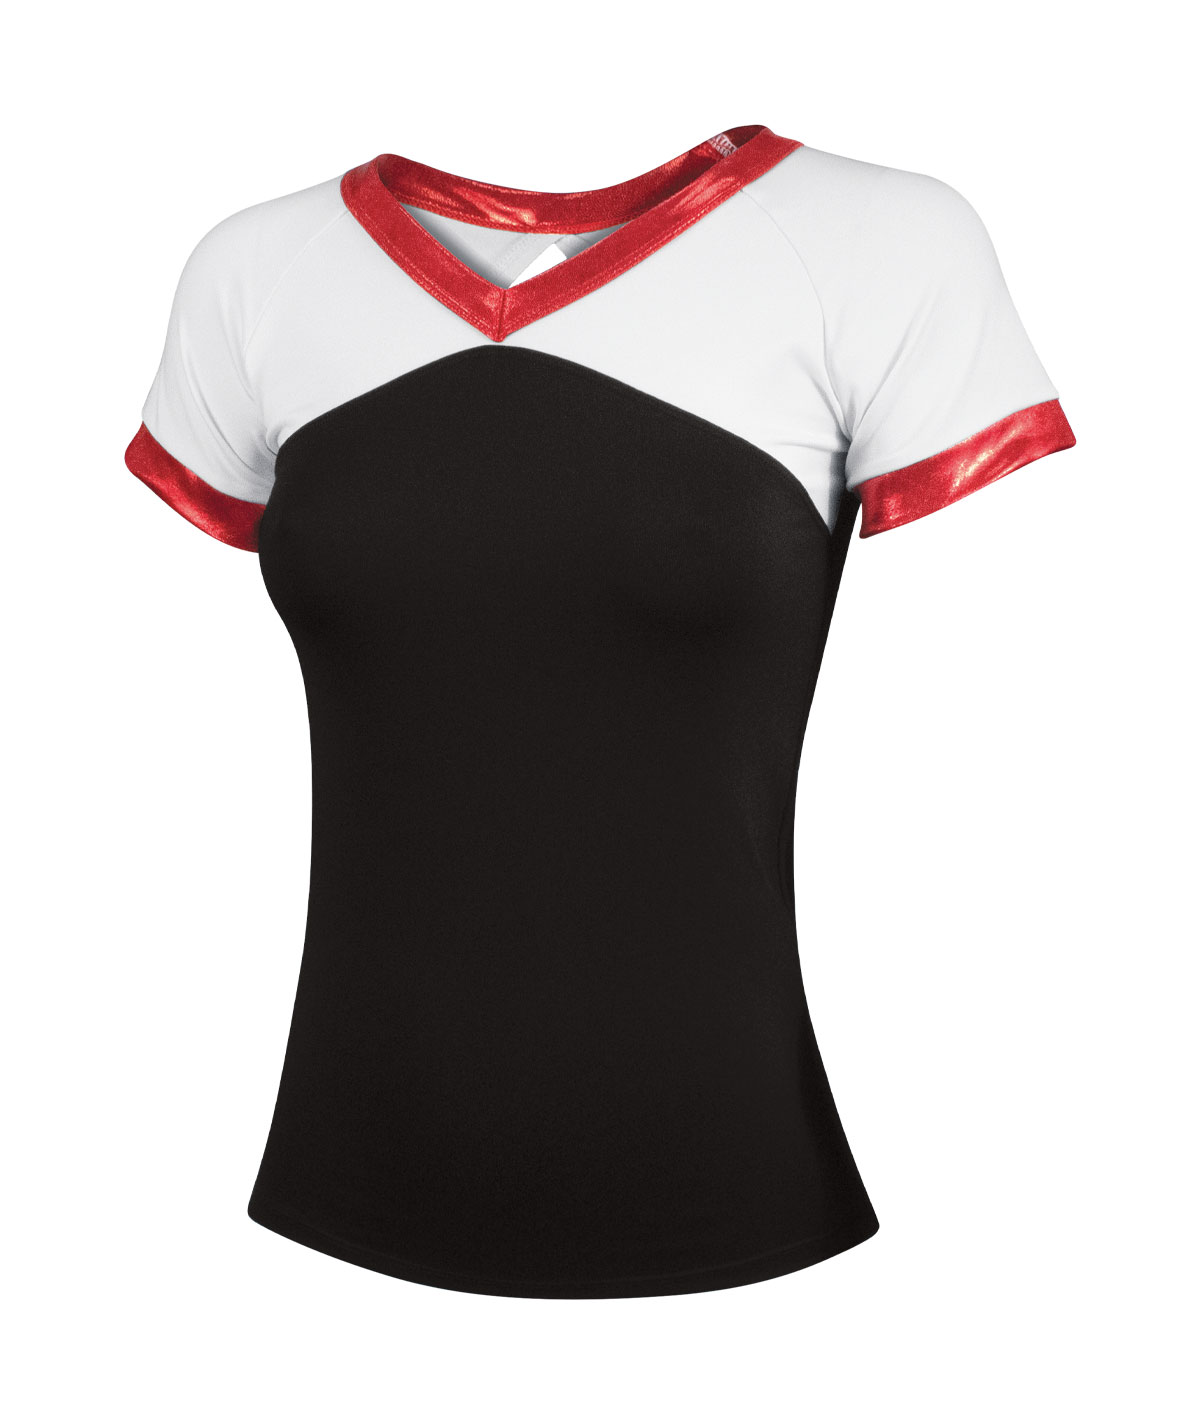 GK All Star Acclaim Iconic Top